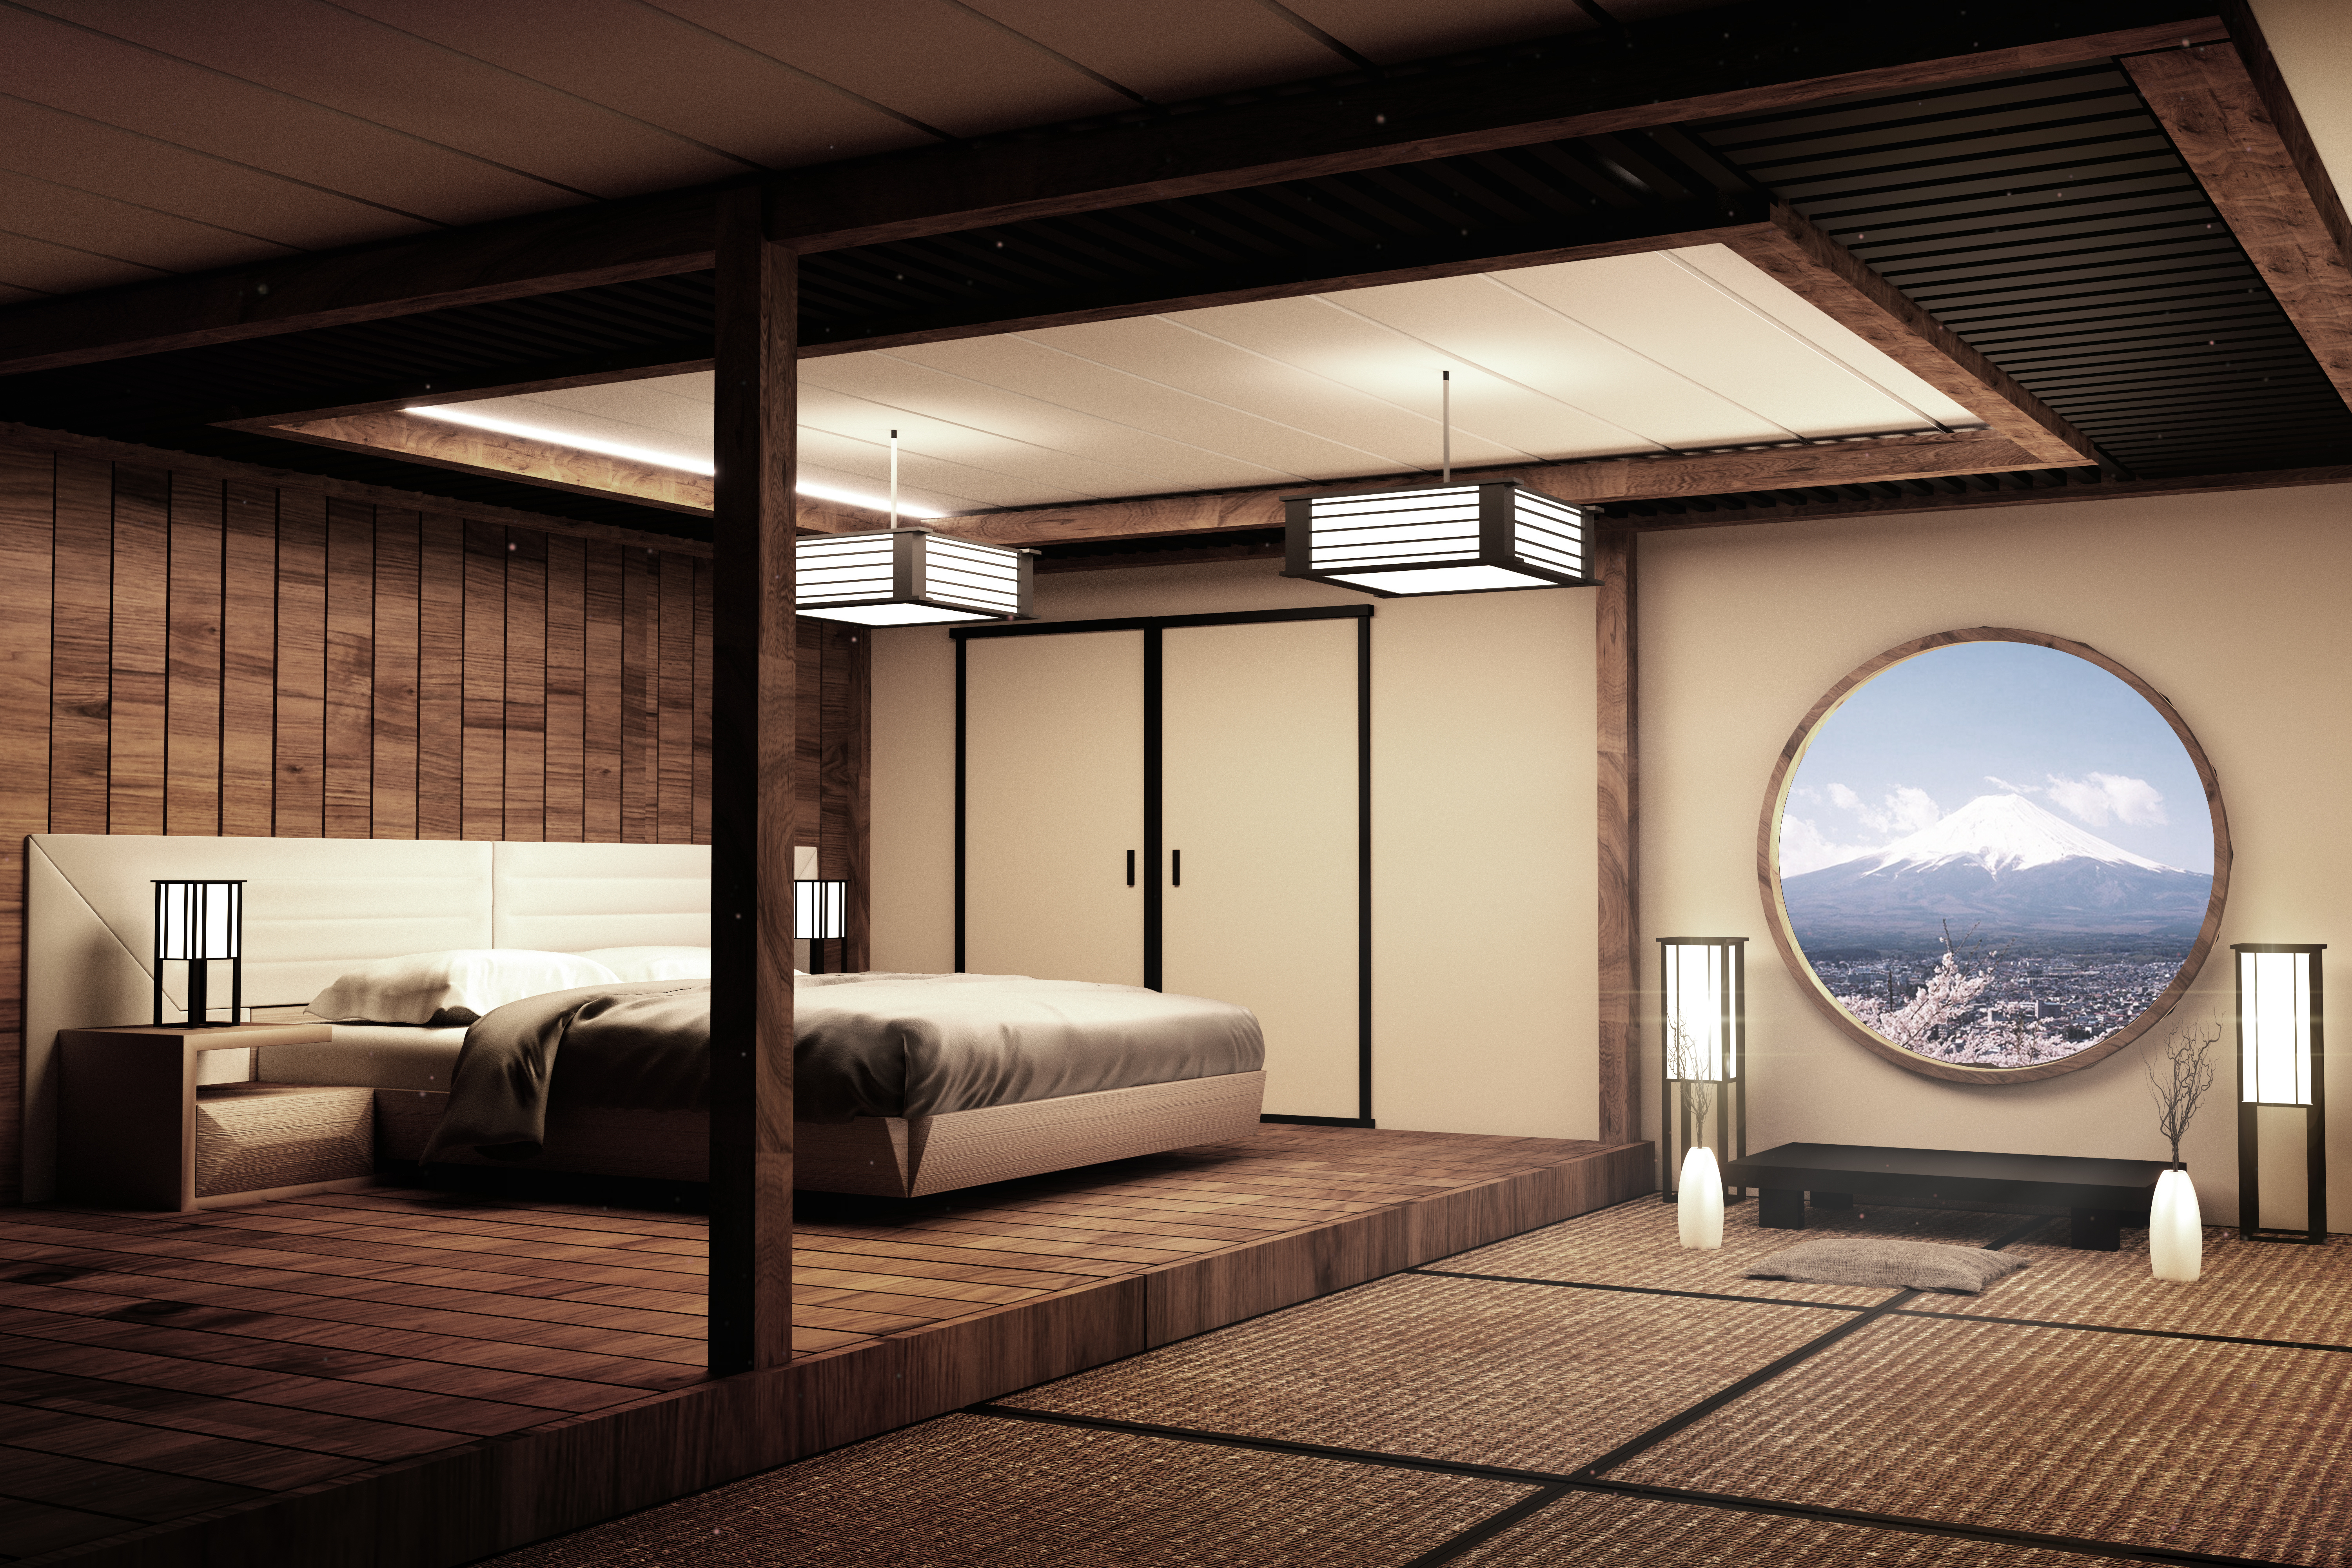 Ryokan Or Capsule Hotel? A Guide To Japanese Accommodation Options